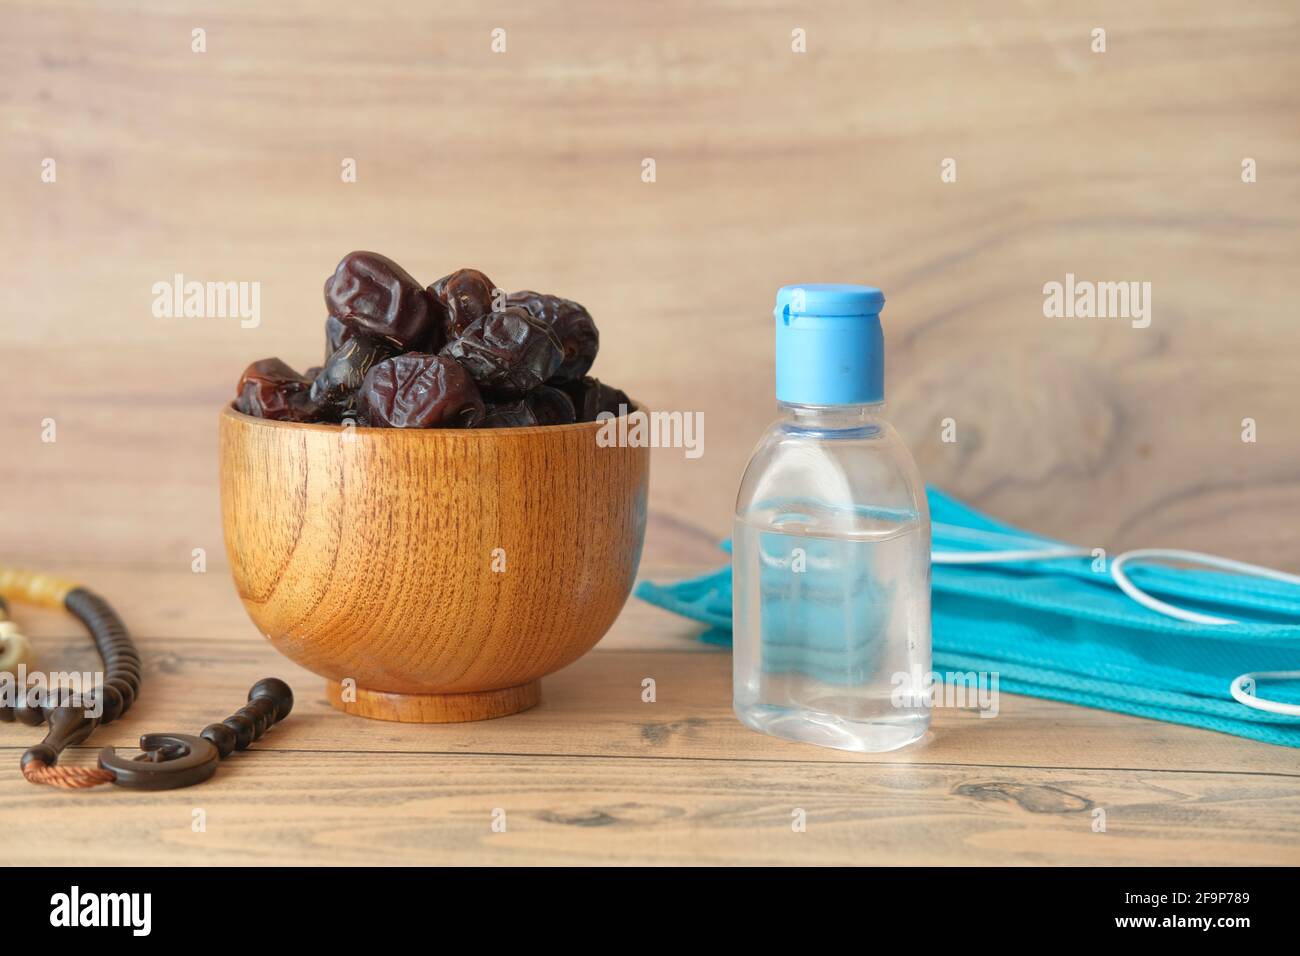 fresh date fruit in a bowl , prayer rosary , hand sanitizer and mask on table  Stock Photo